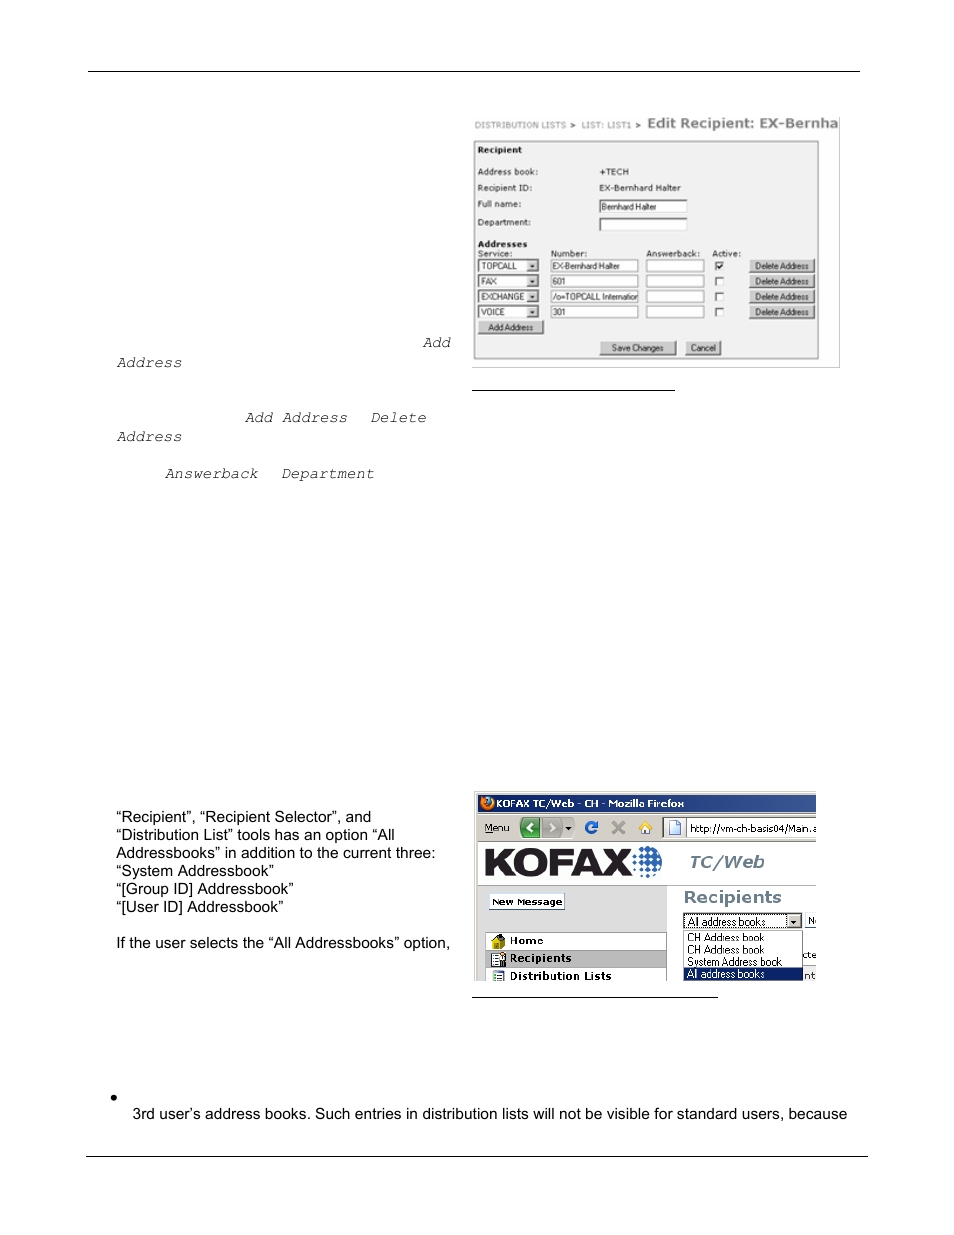 Creating and editing recipients | Kofax Communication Server 9.1 User Manual | Page 33 / 85